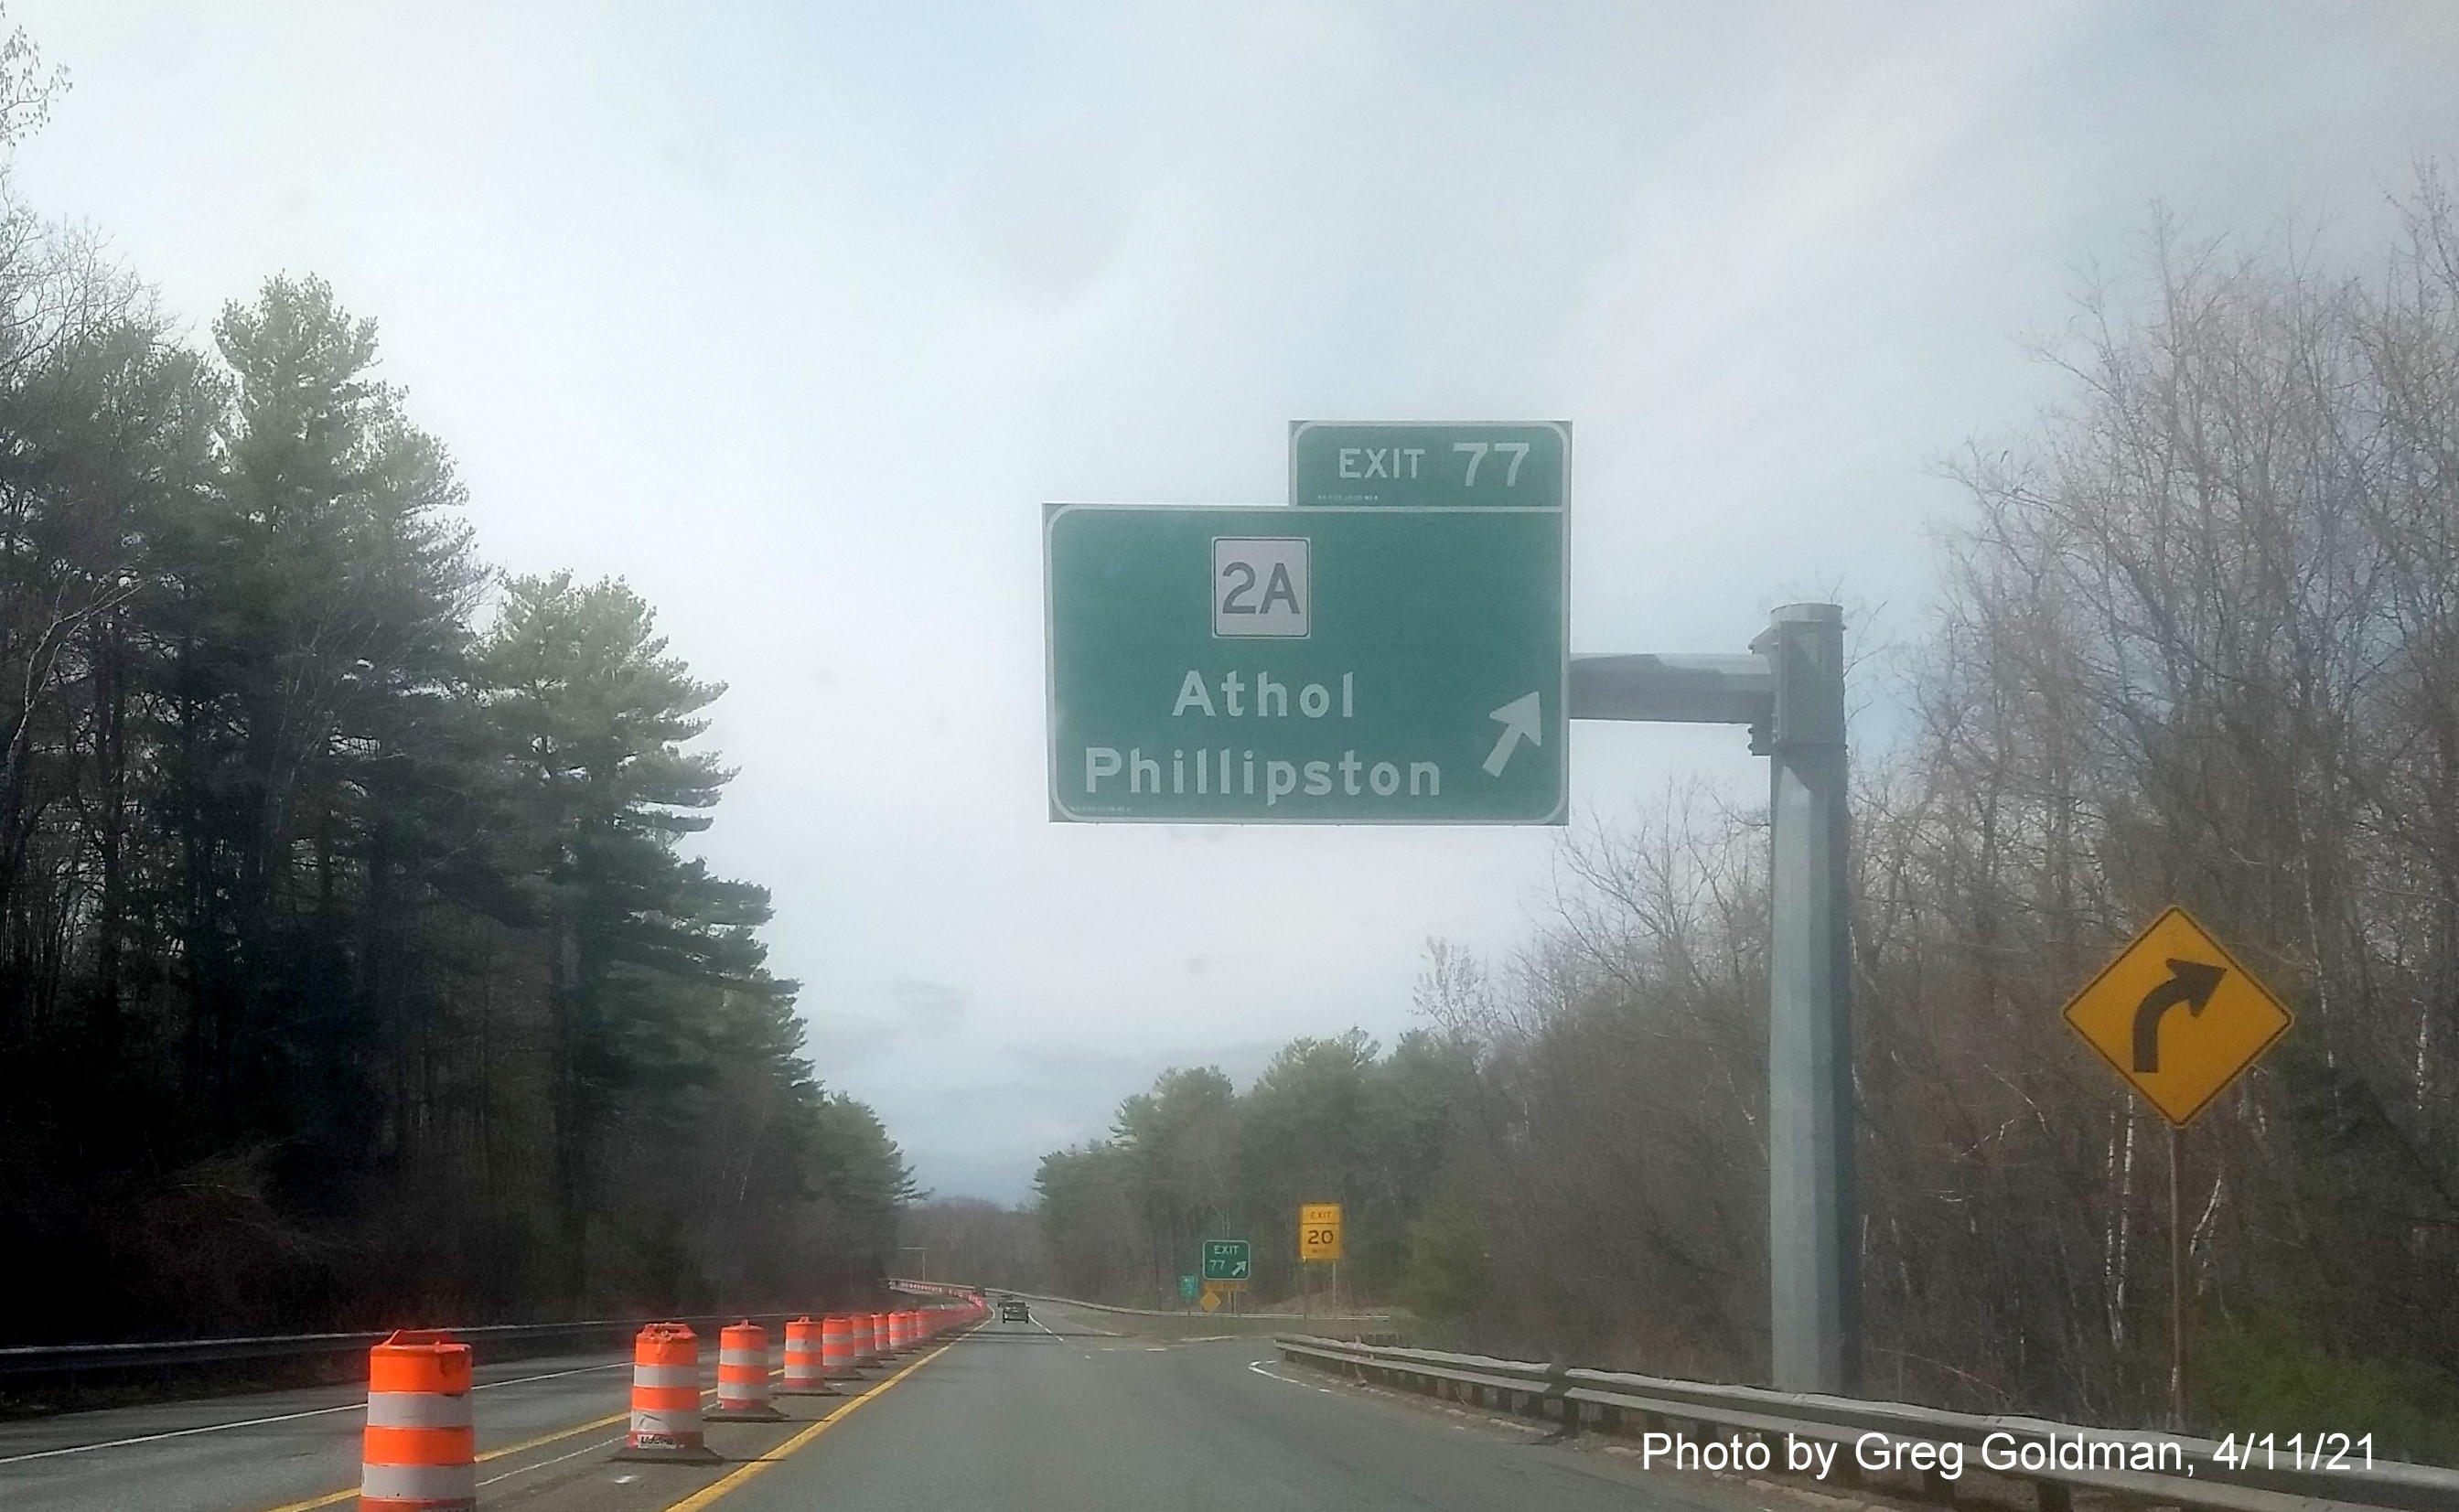 Image of ramp sign for MA 2A exit with new milepost based exit number on MA 2 West in Athol, by Greg Goldman, April 2021